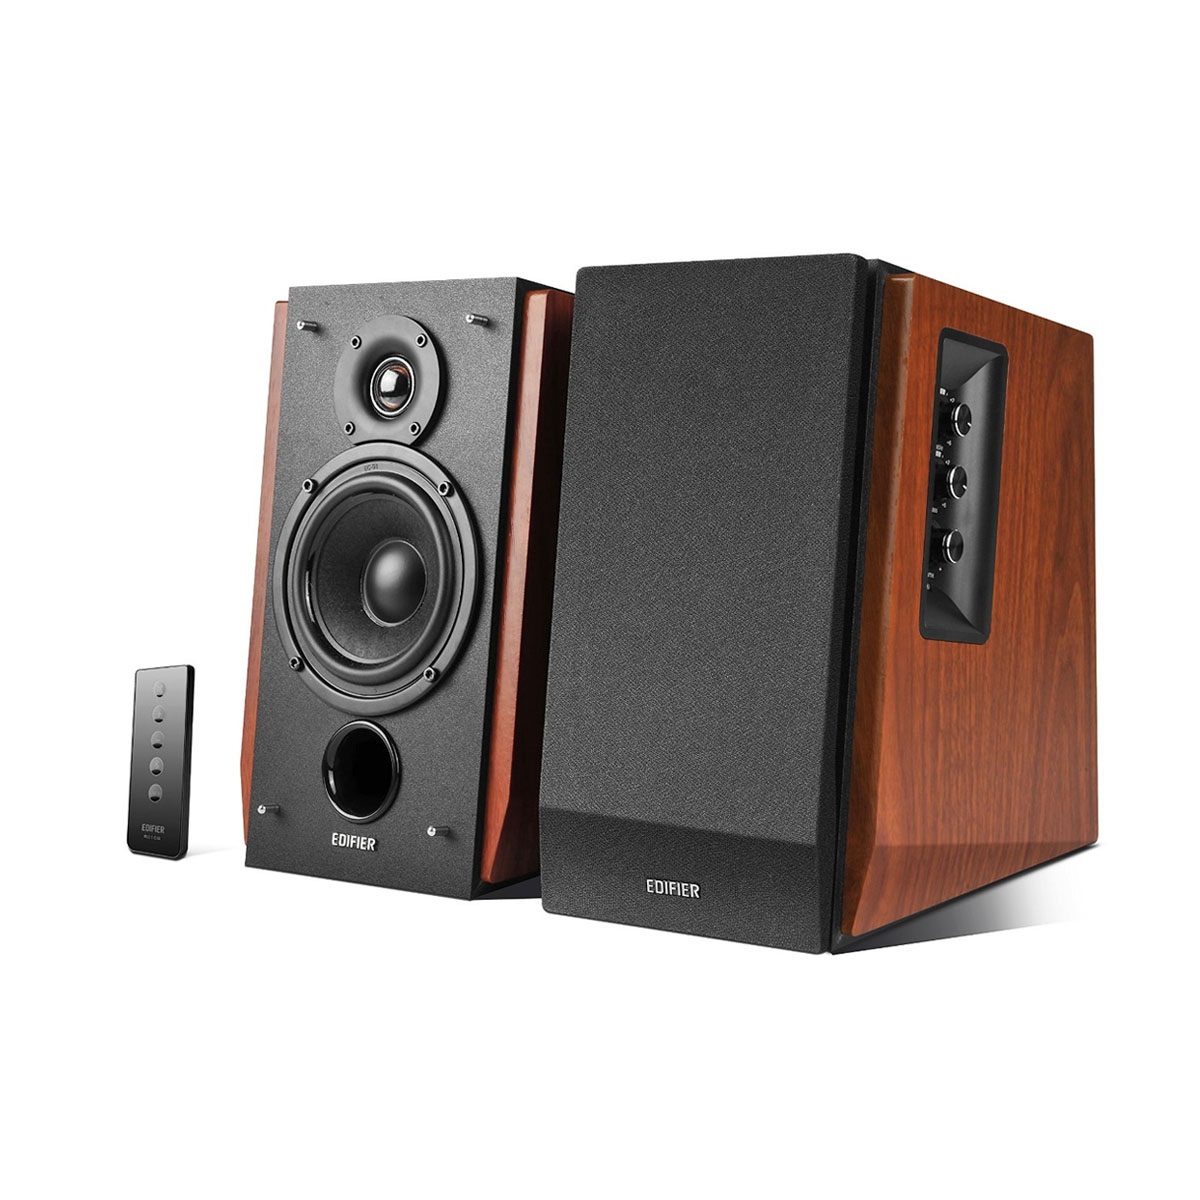 A large marketing image providing additional information about the product Edifier R1700BT 2.0 Lifestyle Studio Speakers - Brown Edition - Additional alt info not provided